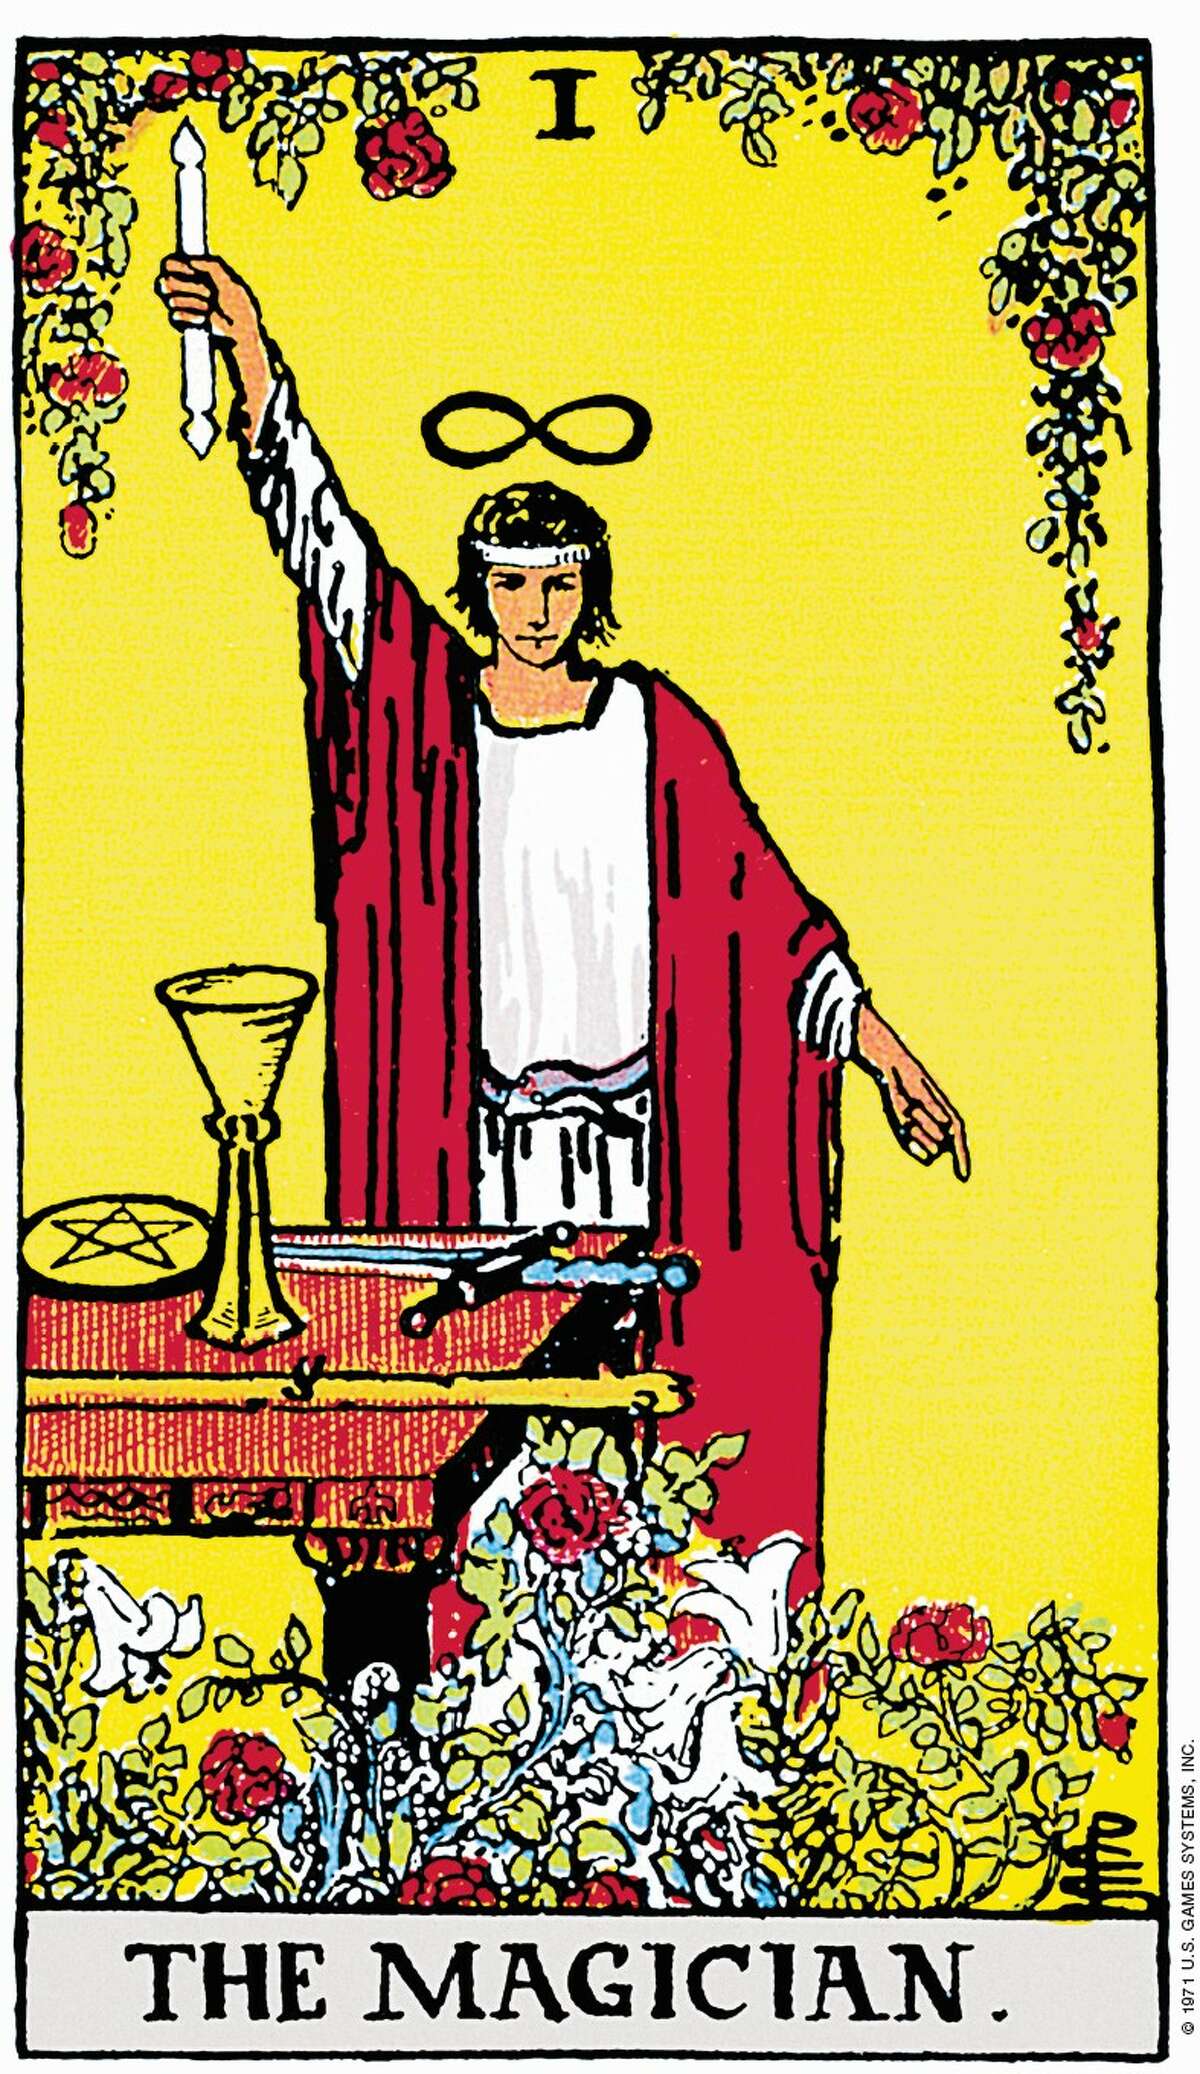 Tarot cards come in a variety of designs, but the Rider-Waite deck more or less set the standard for modern day tarot.  Shown here in The Magician of the Rider-Waite Bridge.